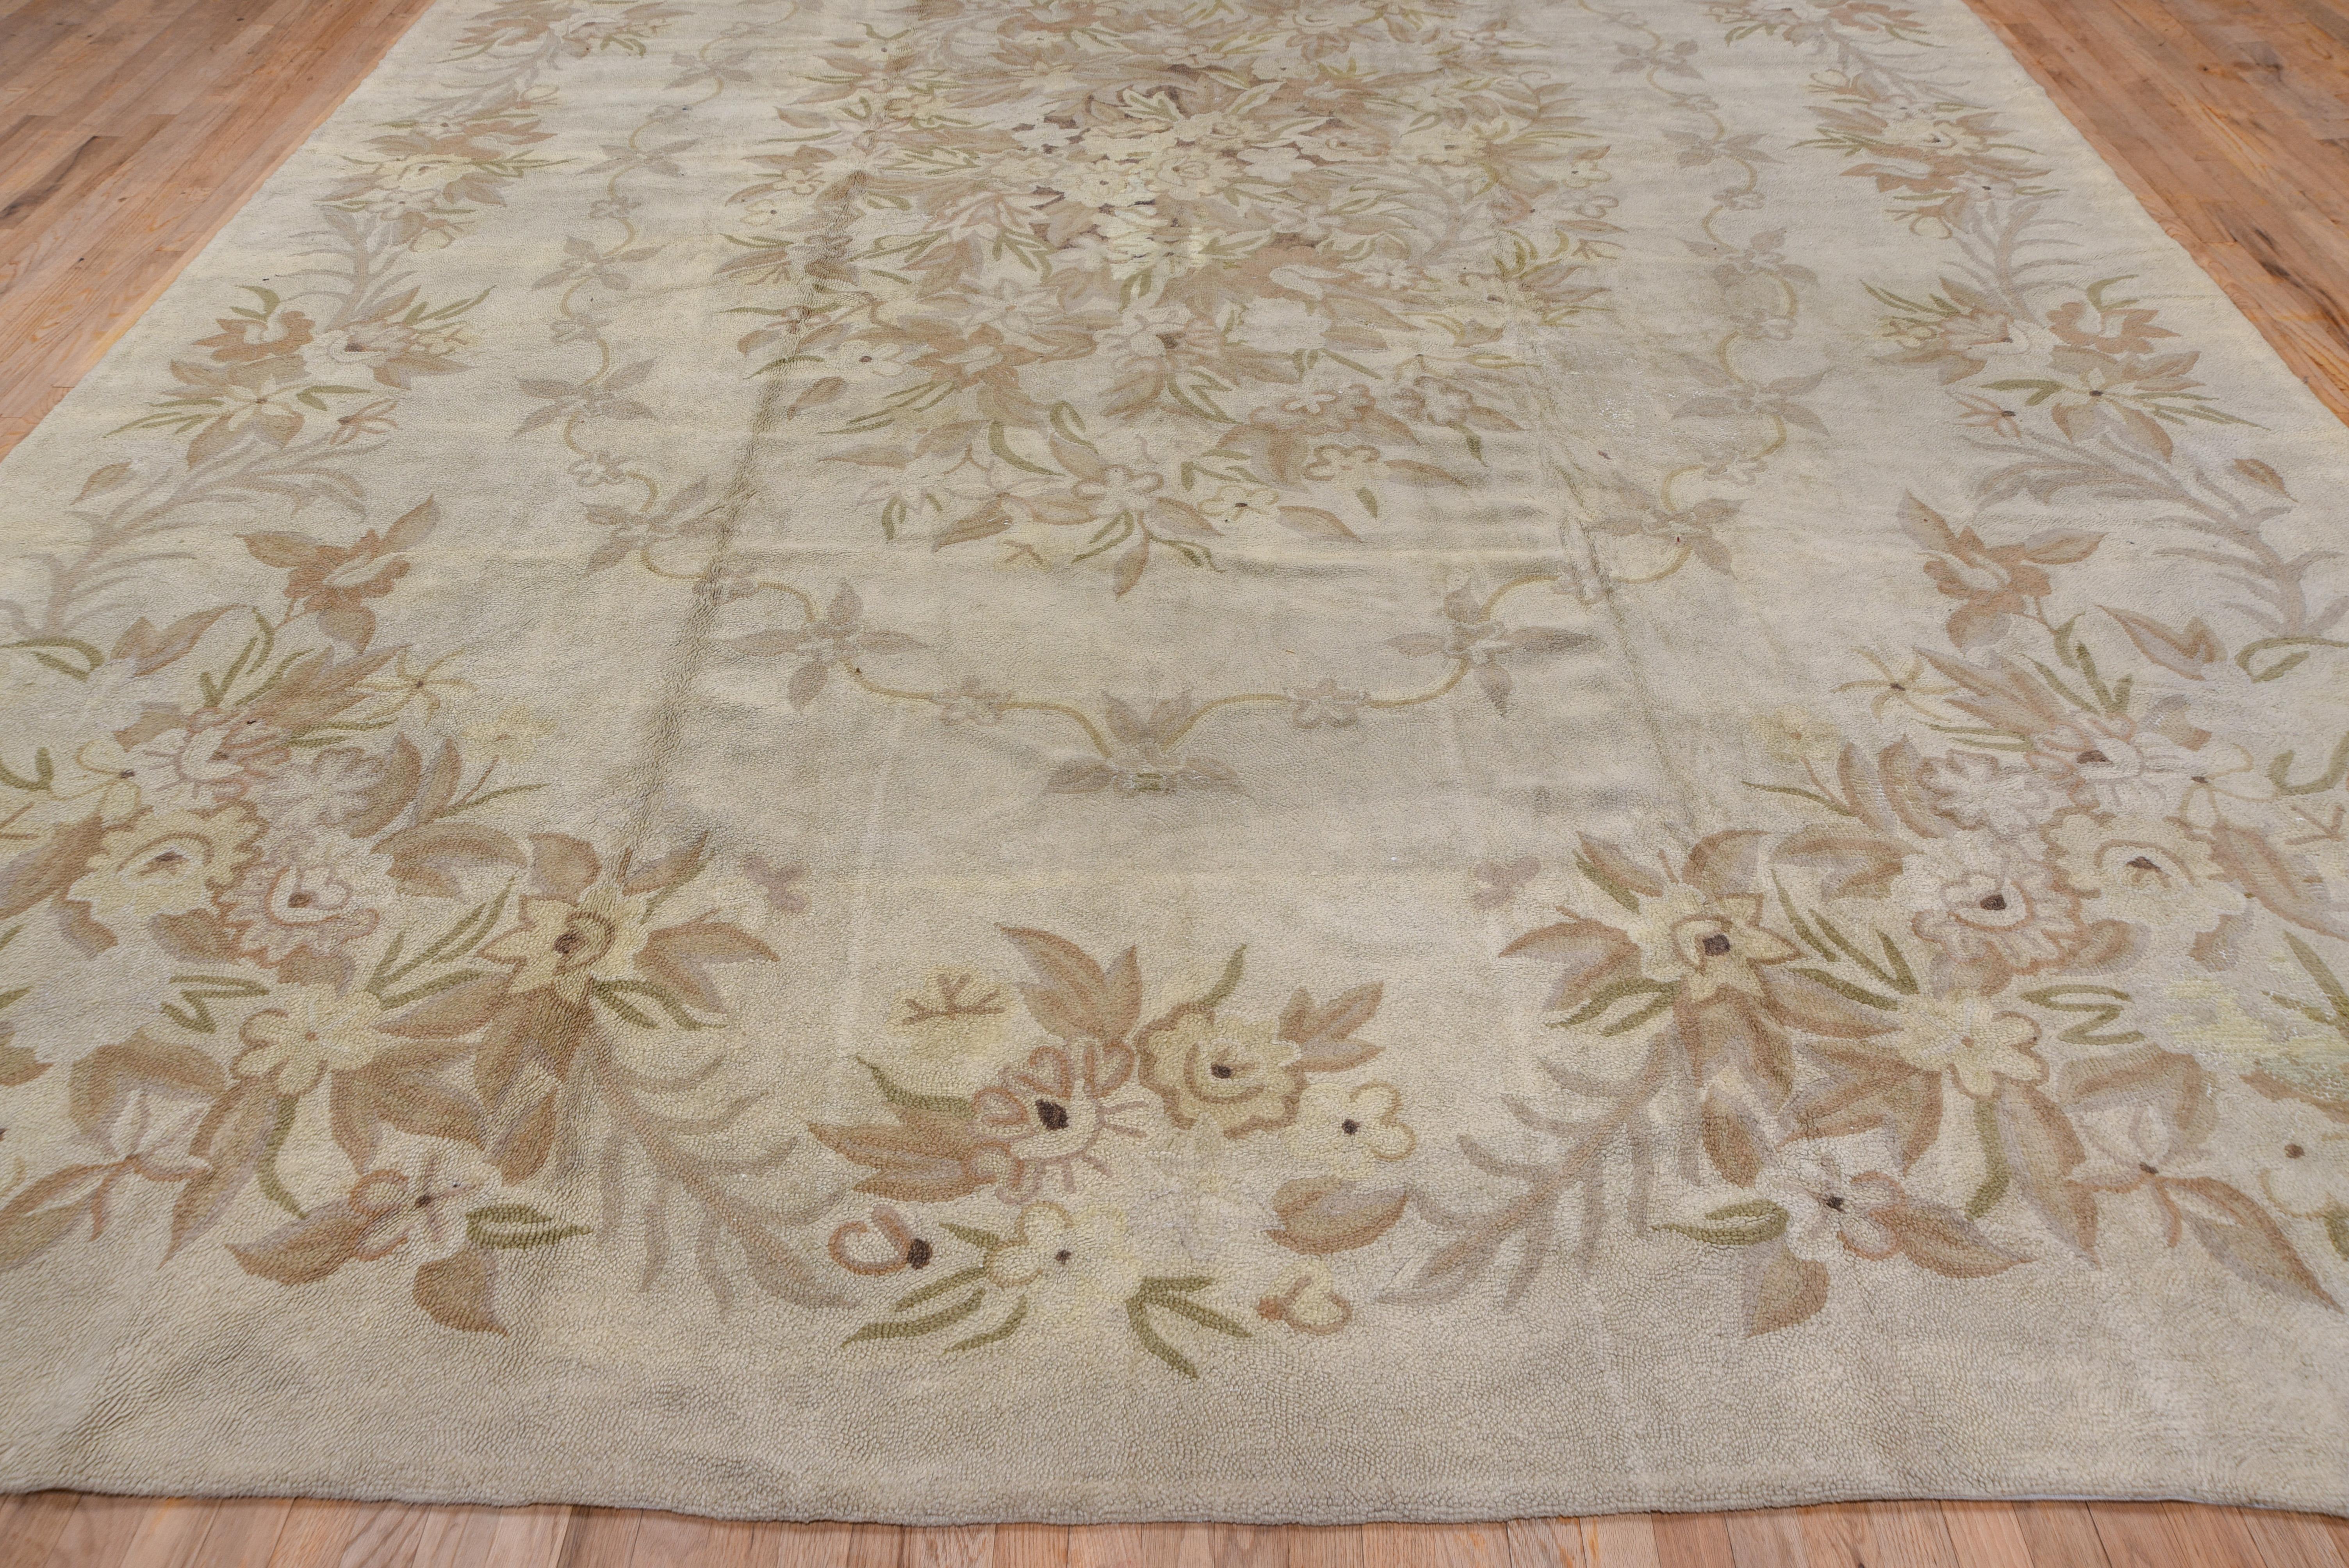 Antique Chinese Hooked Carpet with Neutral Tones, Floral Design, circa 1940s In Good Condition For Sale In New York, NY